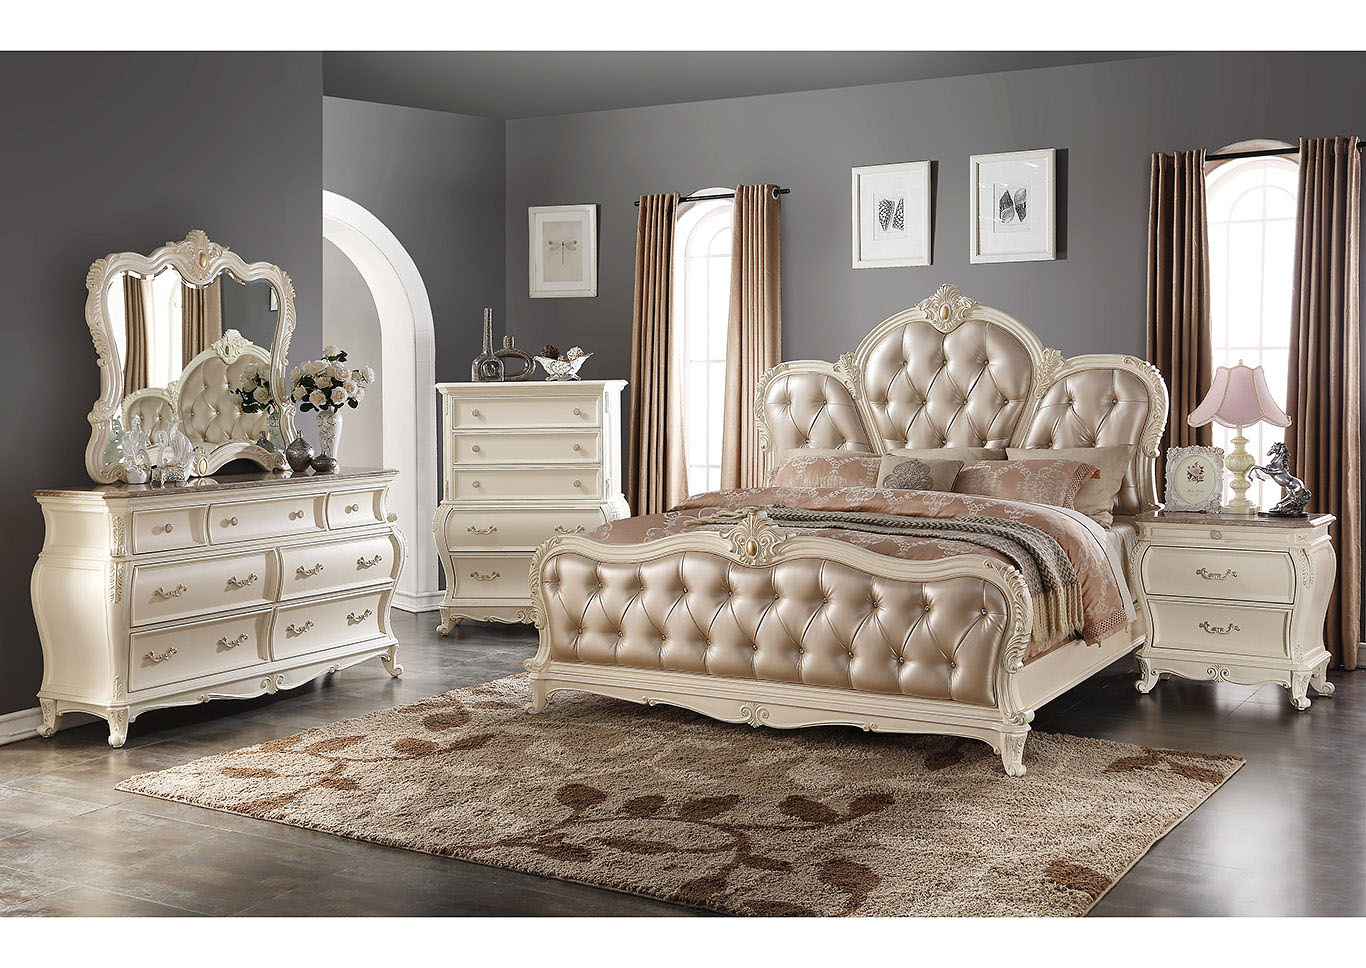 Rbs Furniture Bronx Ny Marquee Pearl White Upholstered Queen